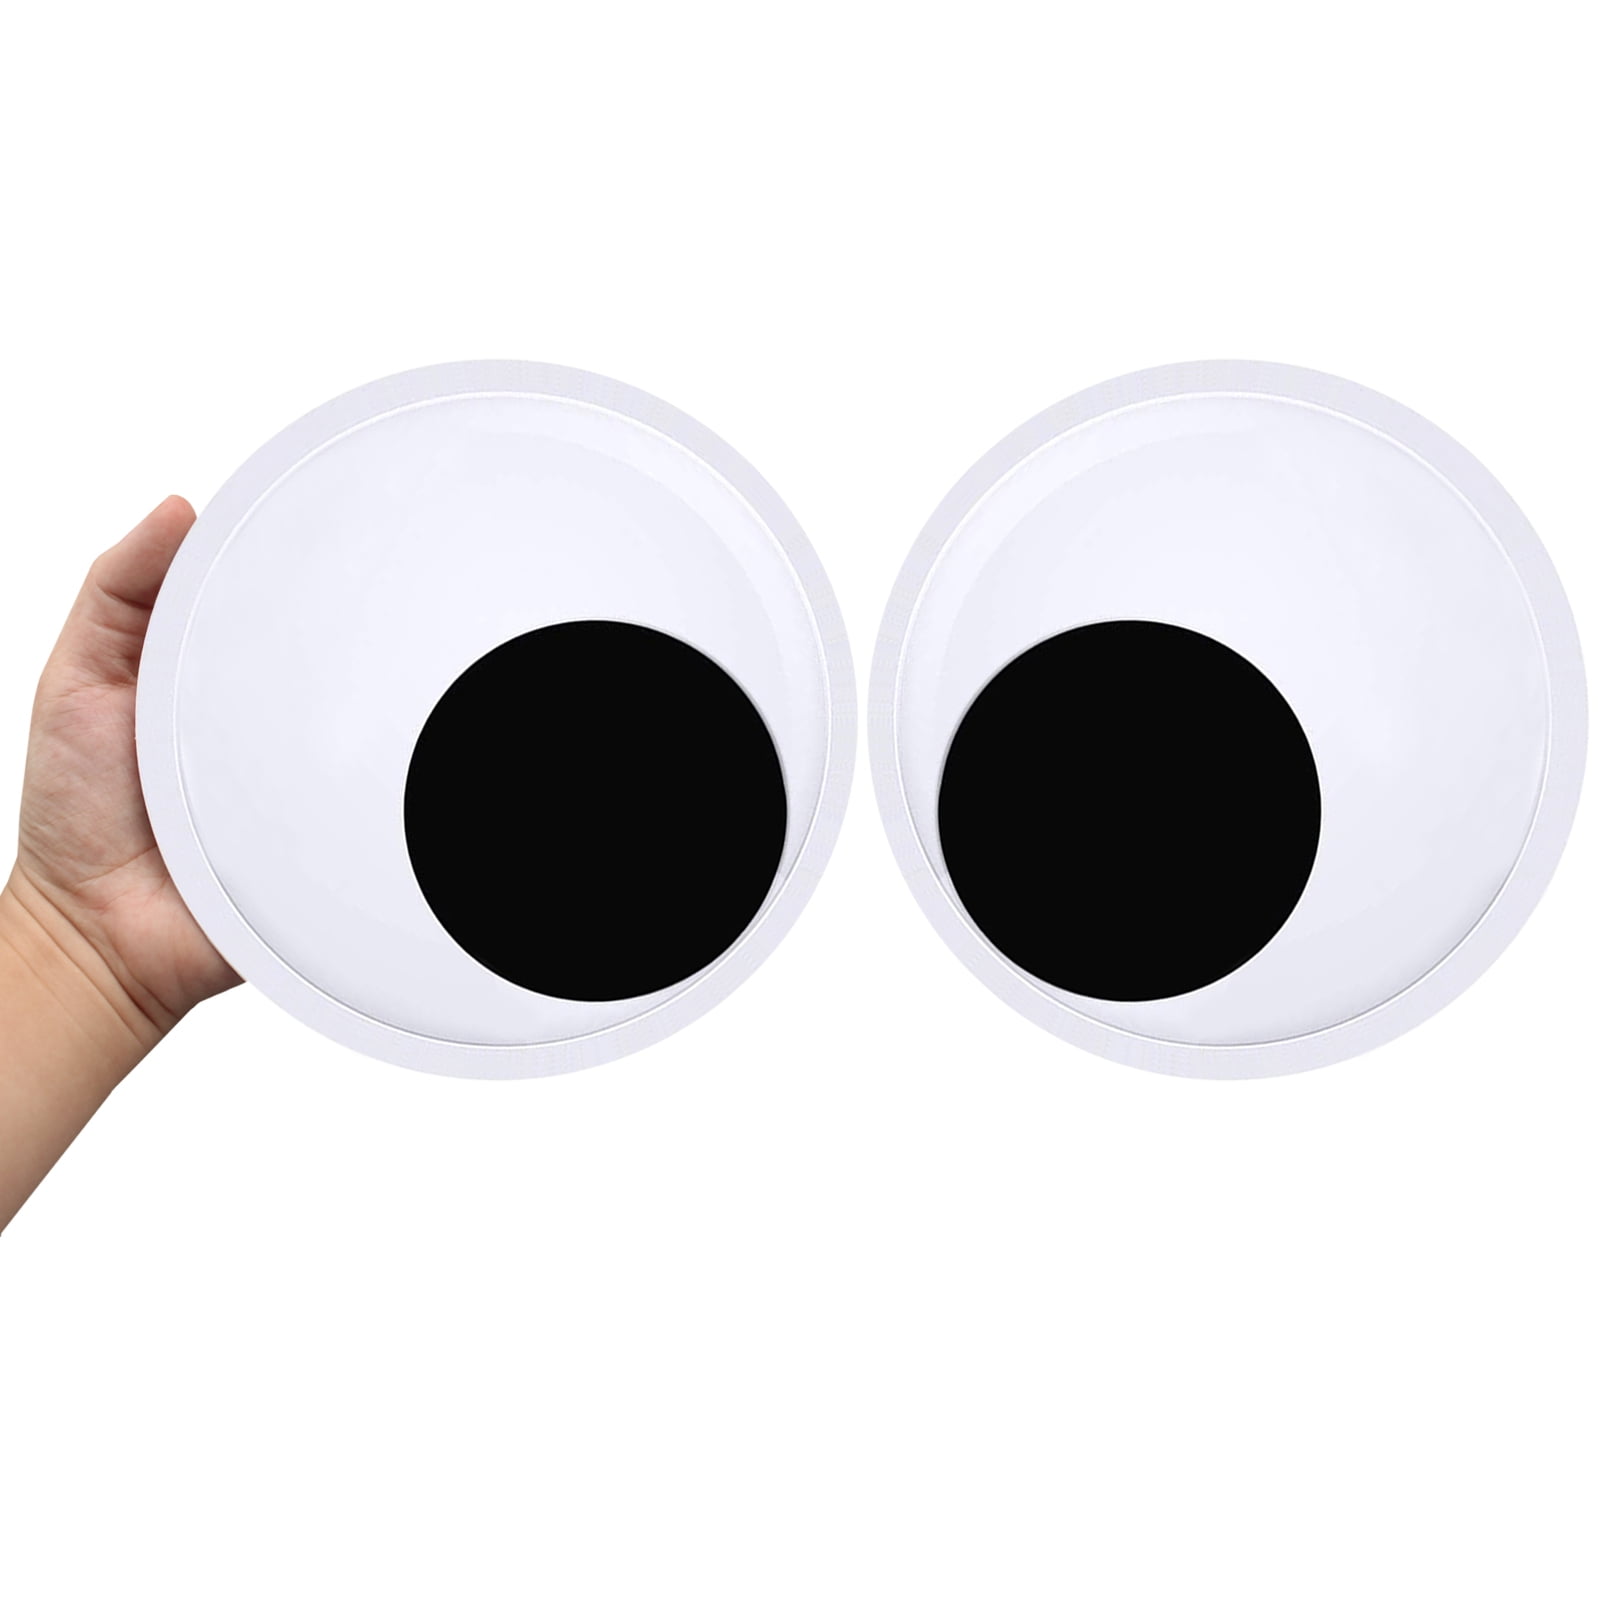 Chicago Teacher Store - Googly Eyes are in stock! And check out